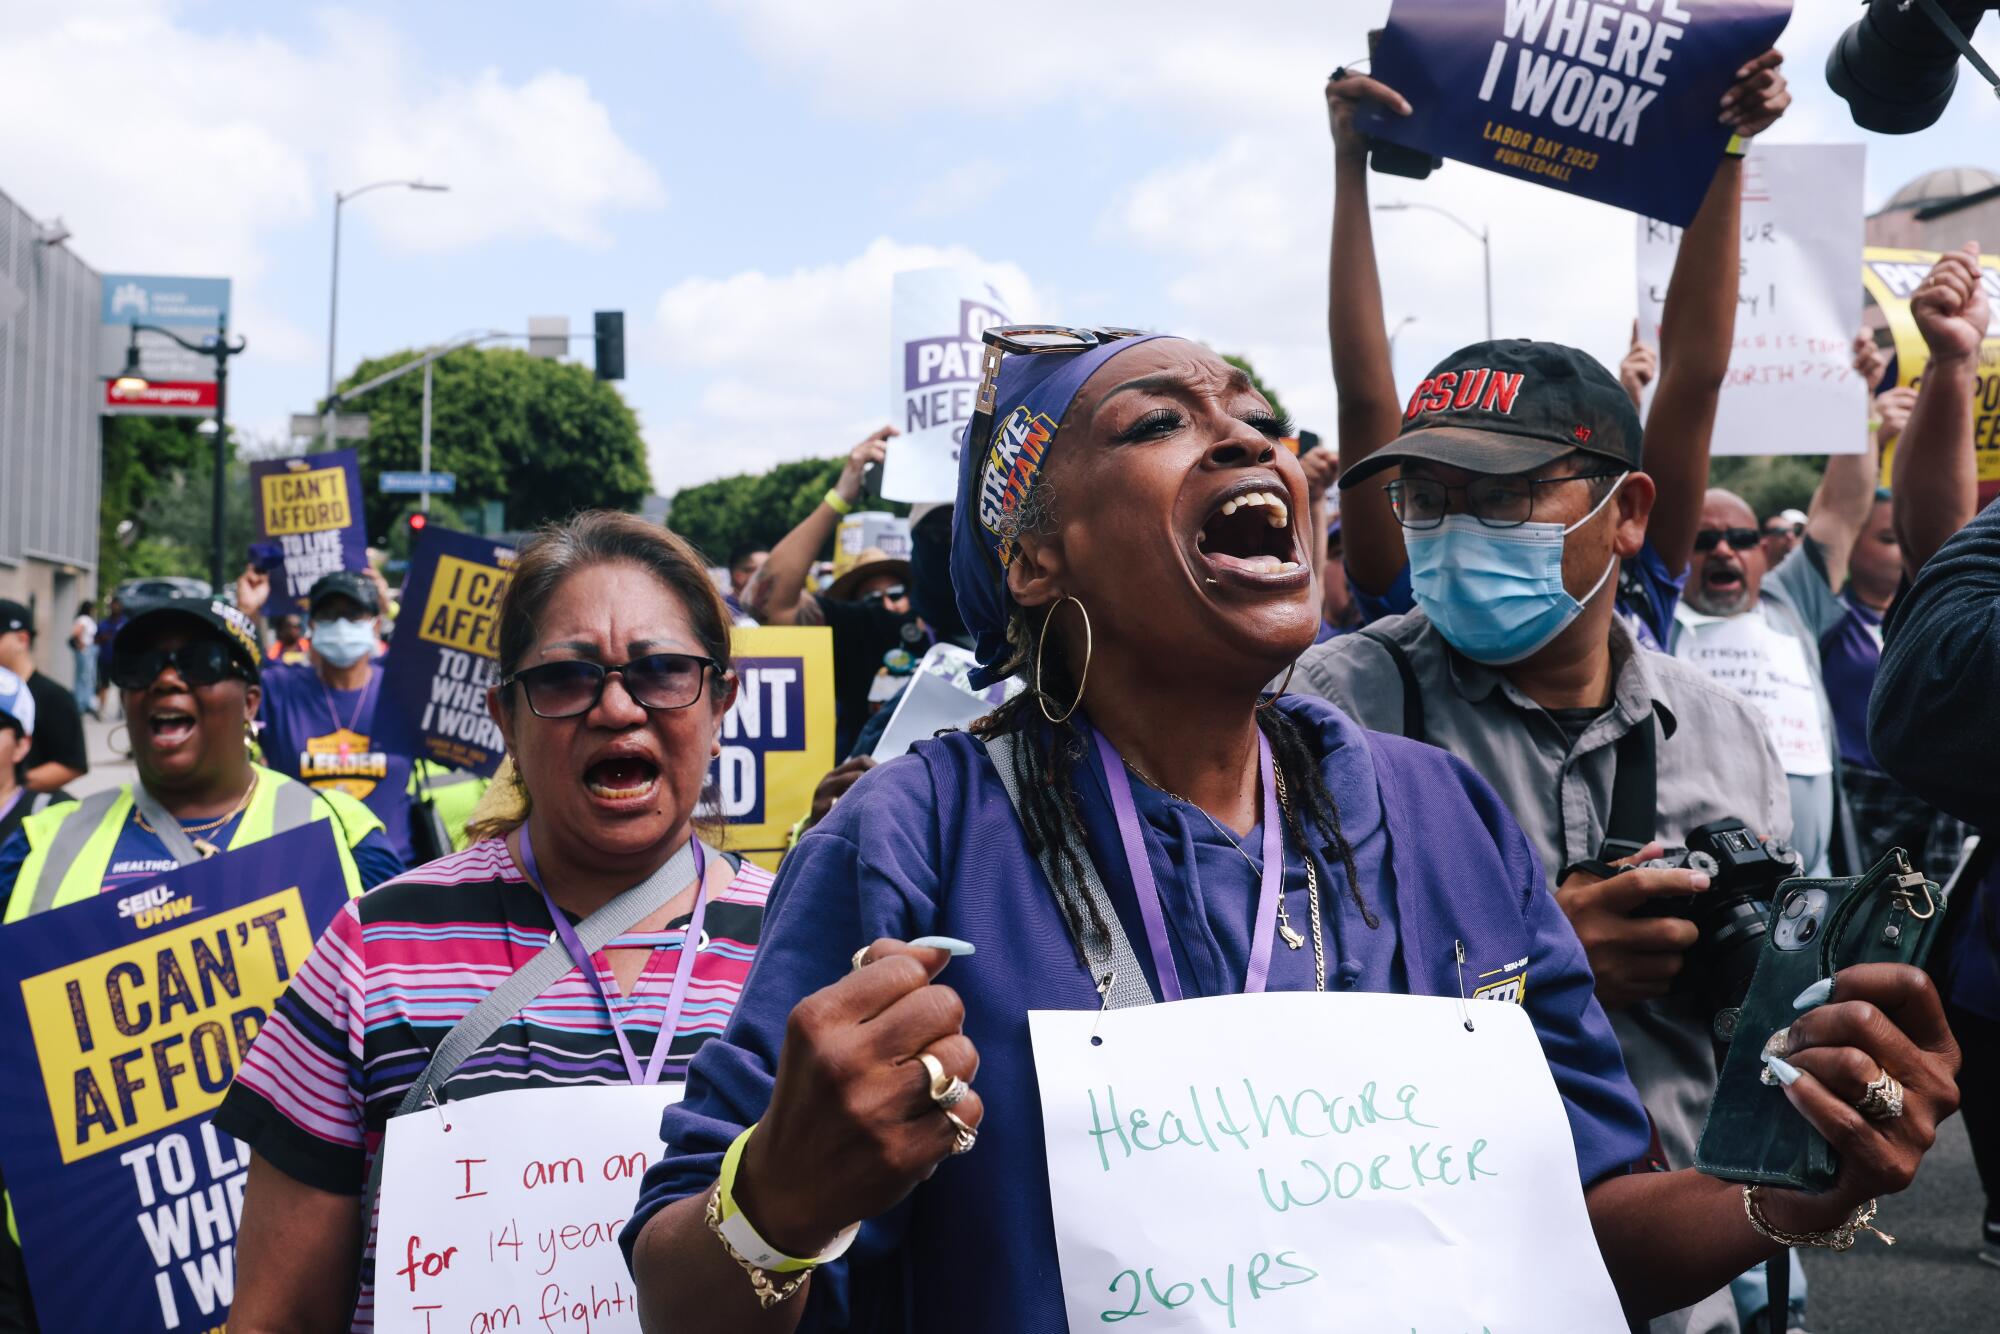 Healthcare workers march for improved working conditions and increased investment in the healthcare workforce.